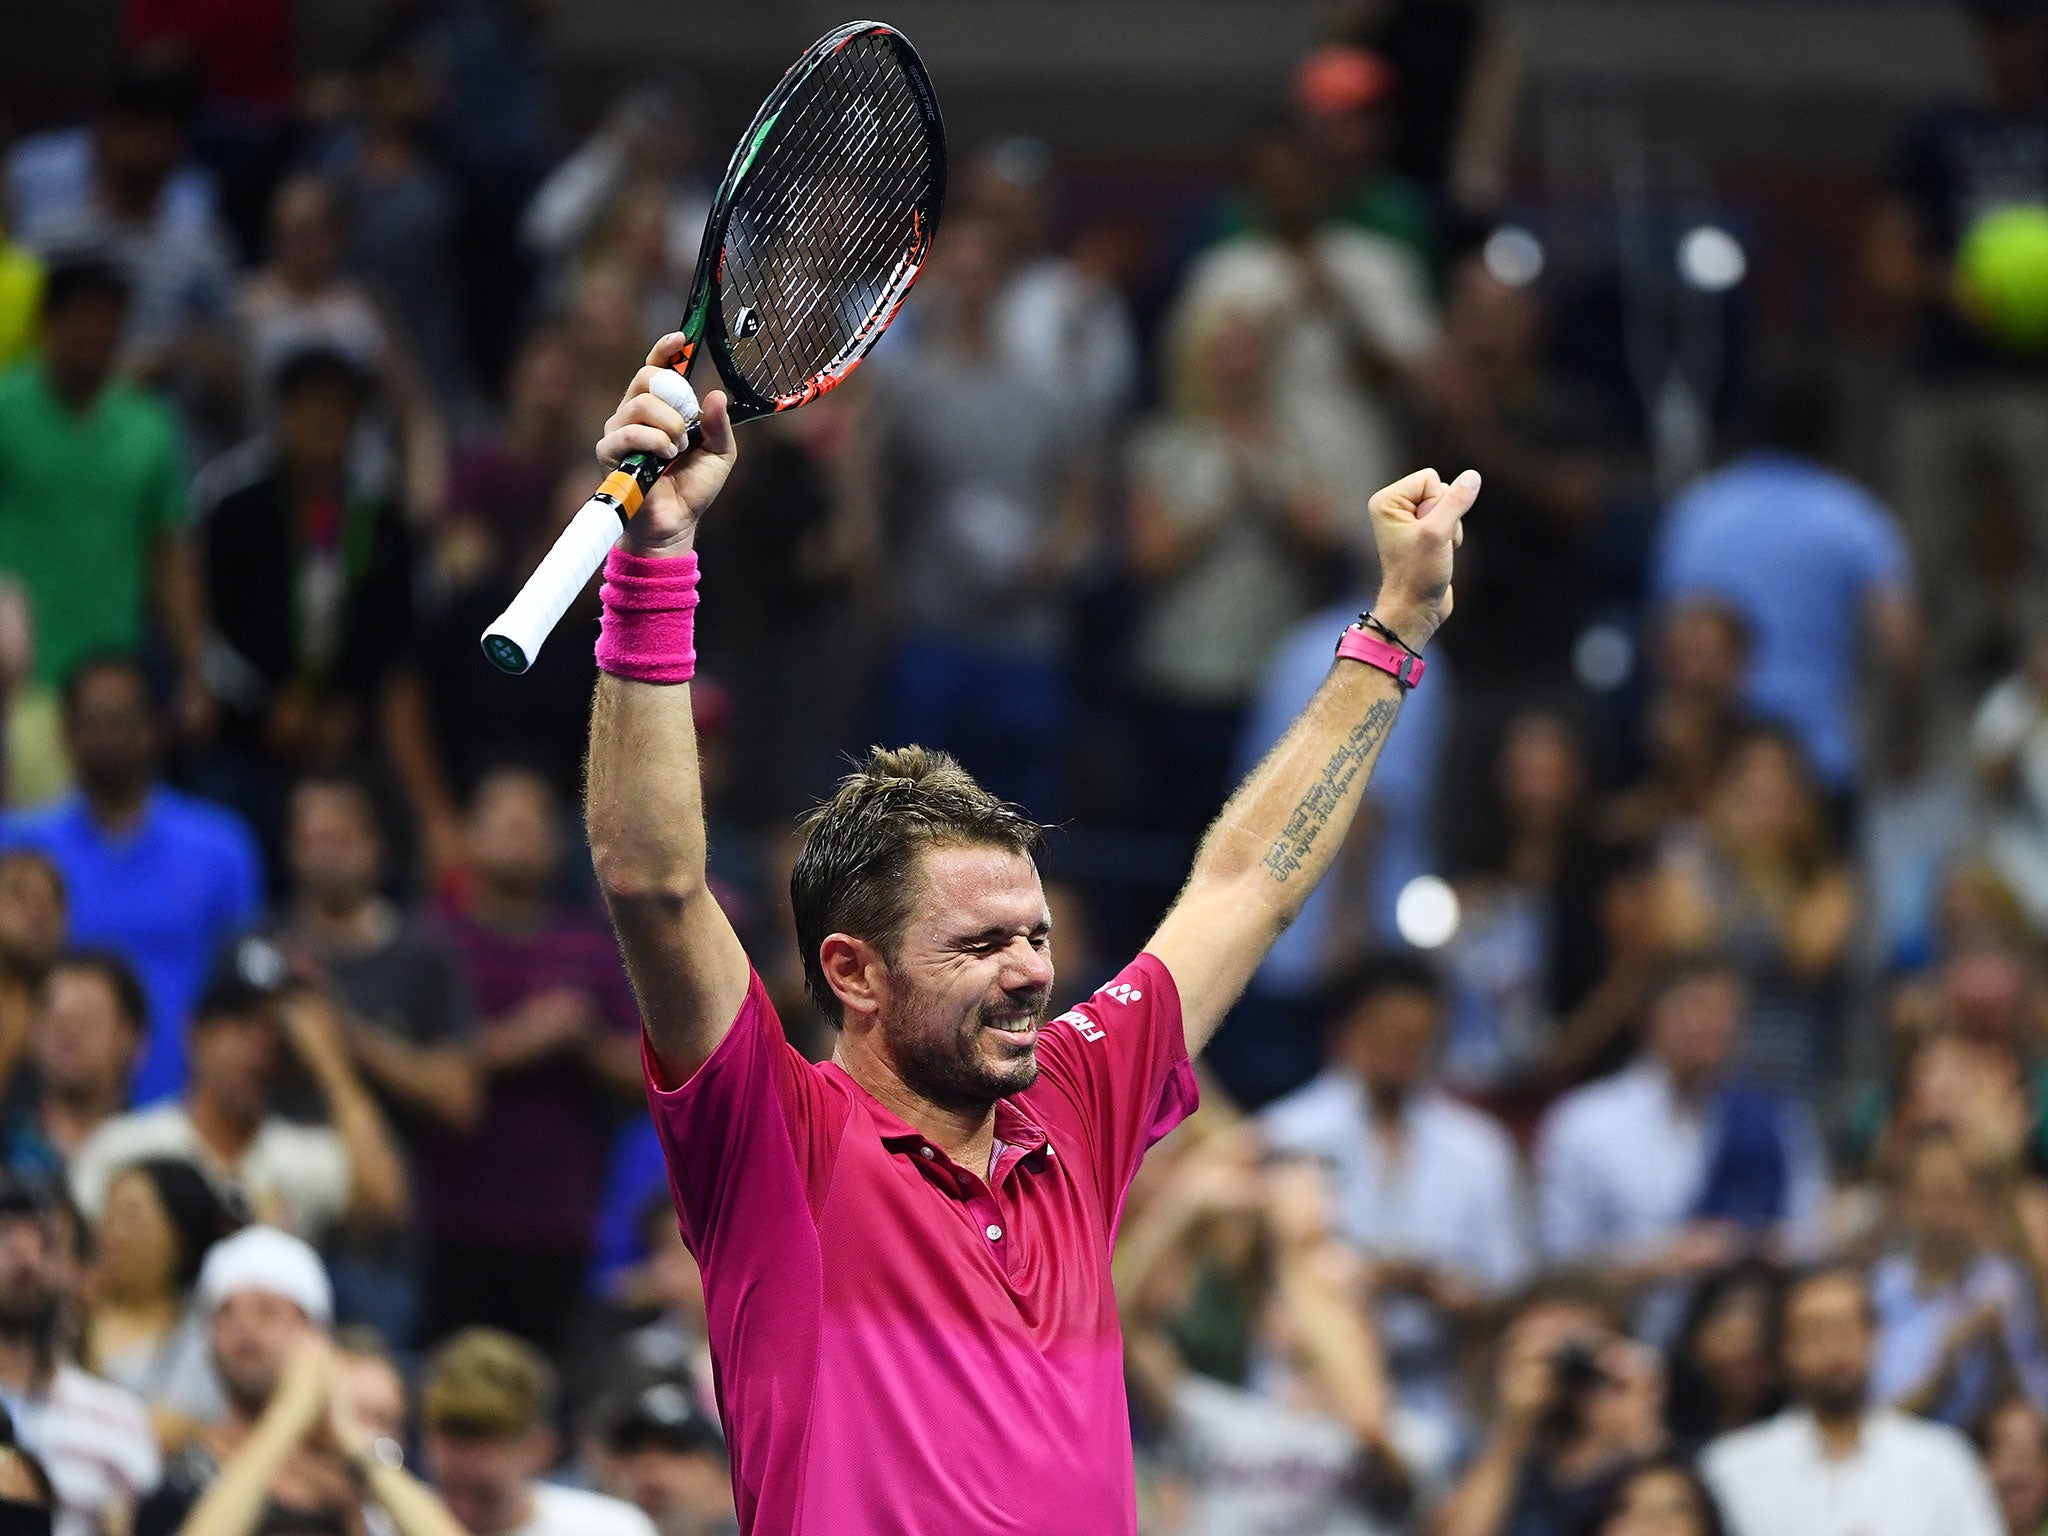 &#13;
Stan Wawrinka is the current US Open champions &#13;